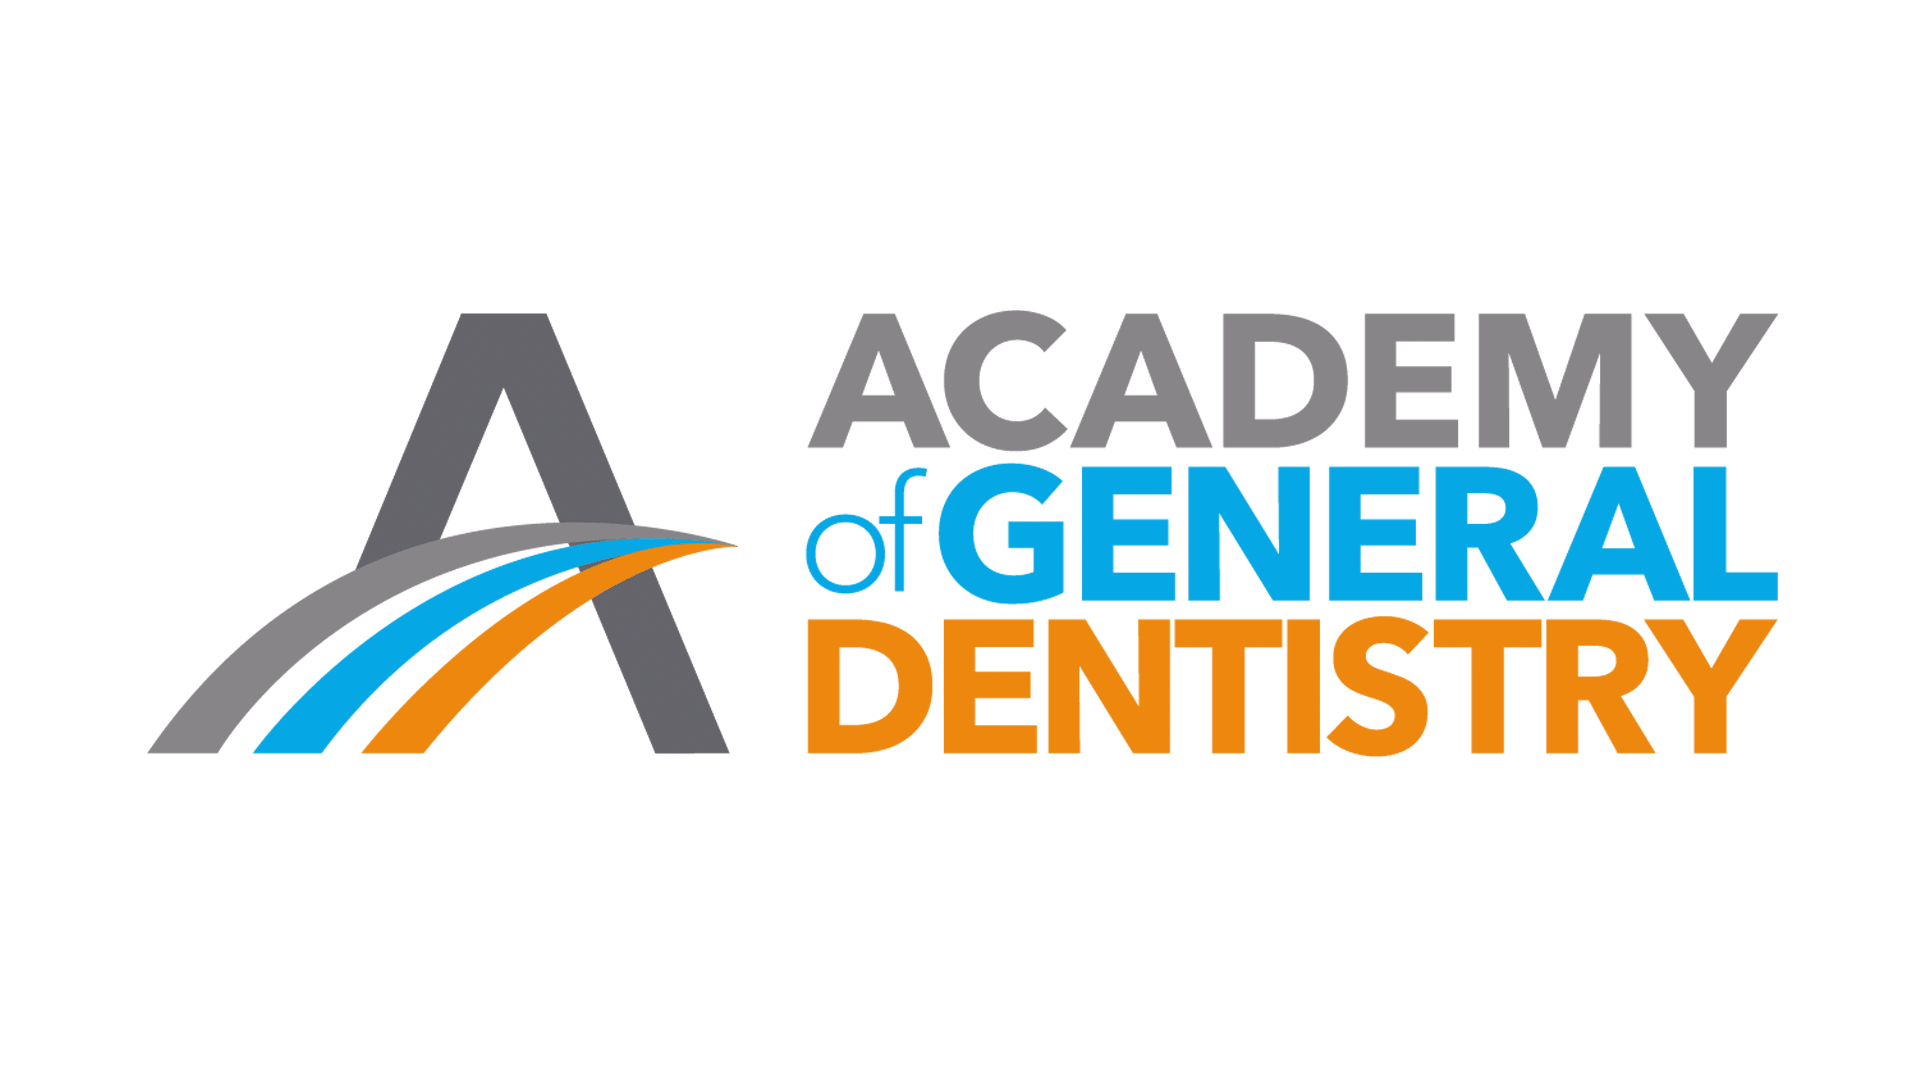 American Academy of General Dentistry Logo dMobile Home Image - Cherrywood Dental Care - Dentist in Savage, MN